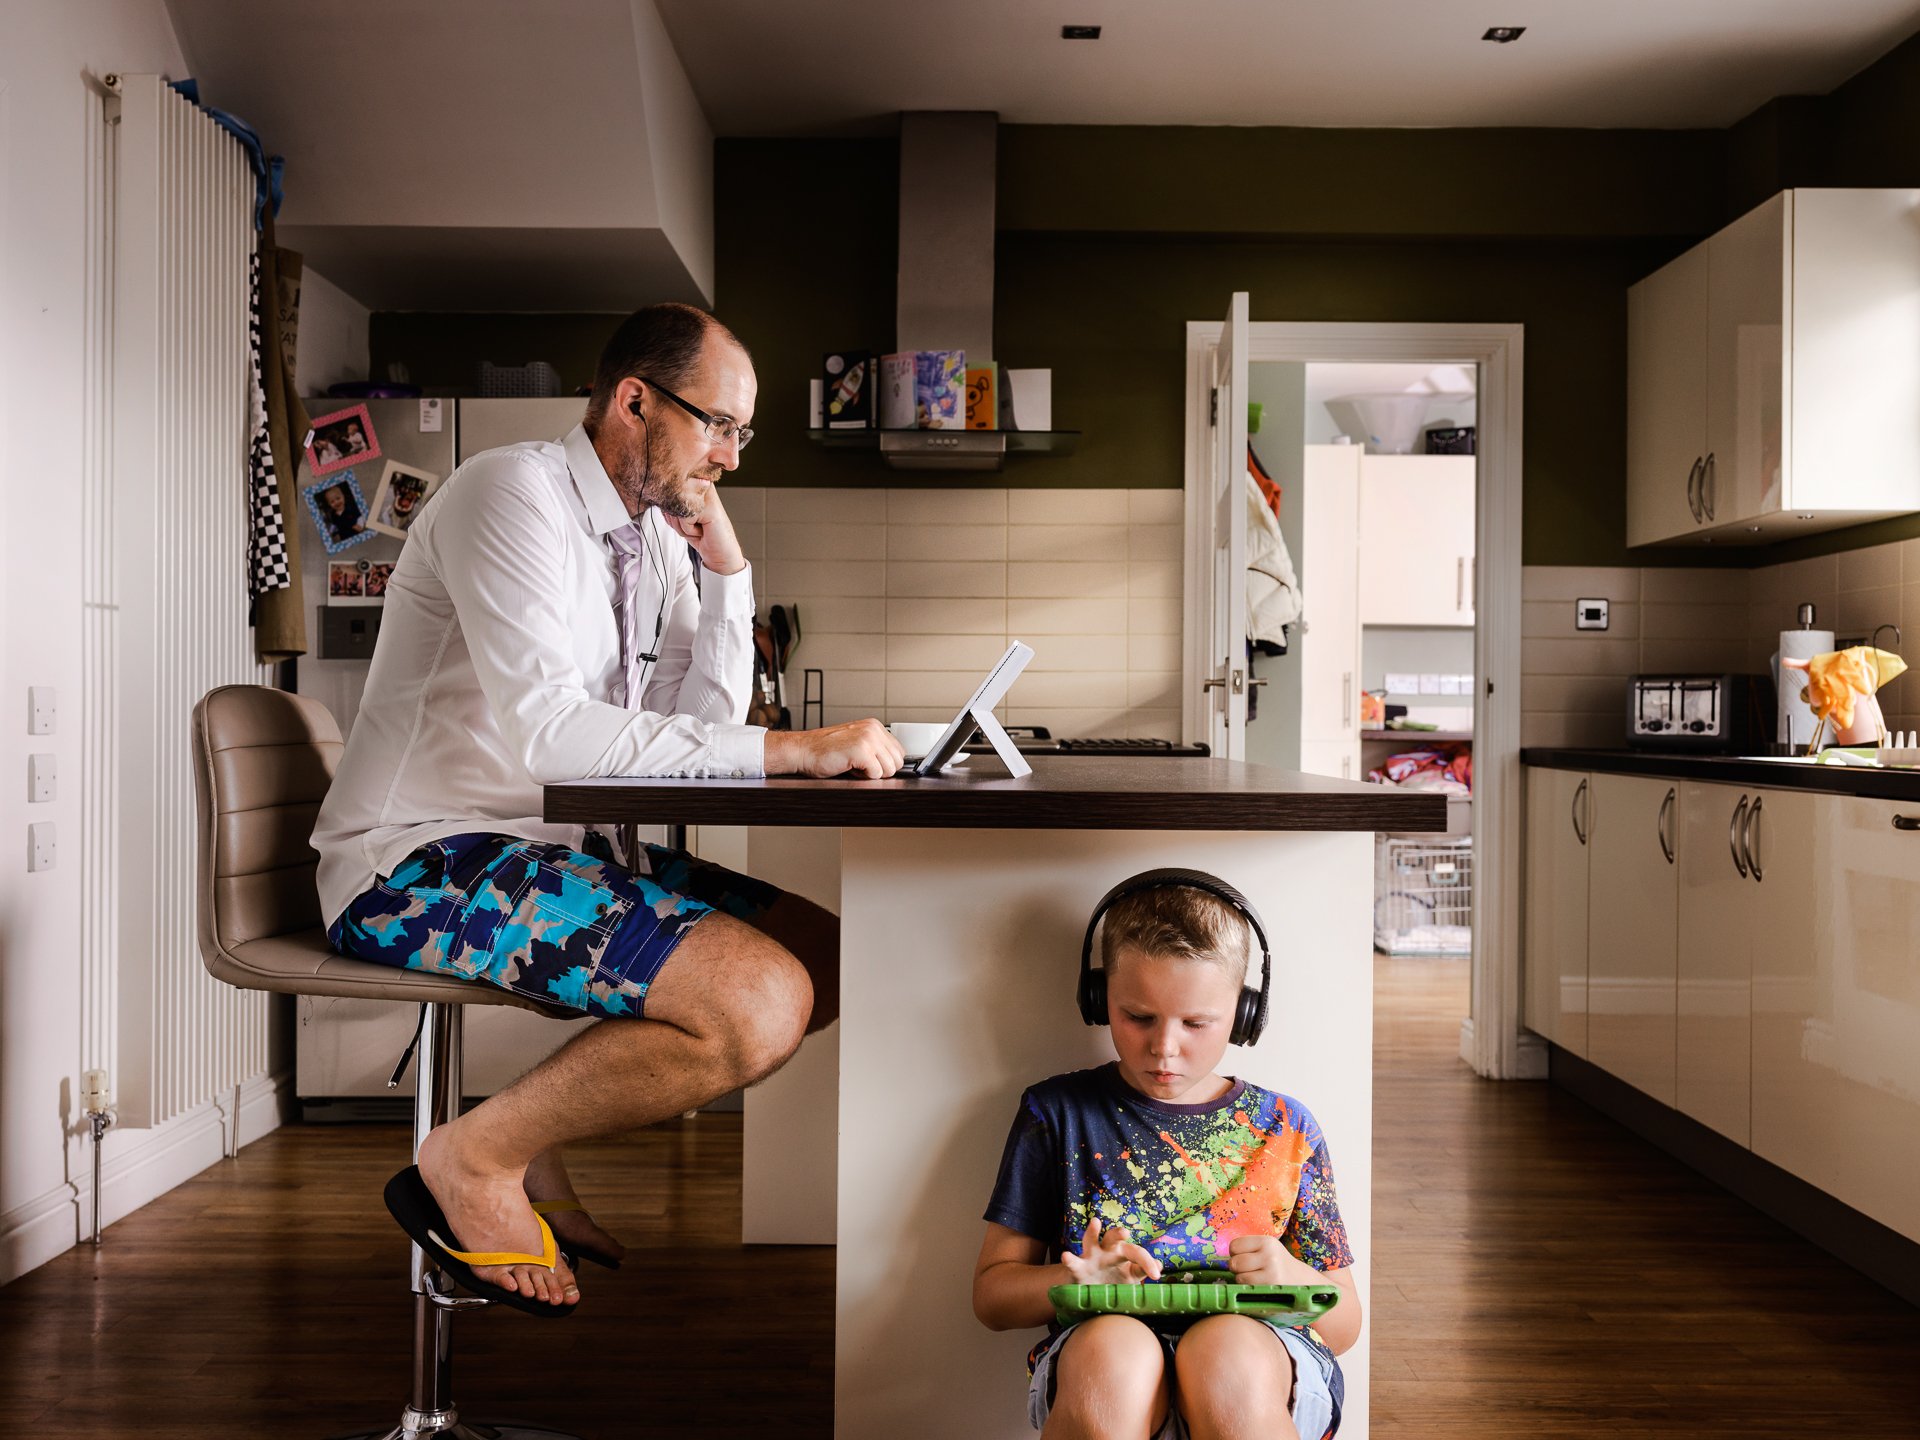 Lifestyle photo of father and son using digital pads in kitchen.